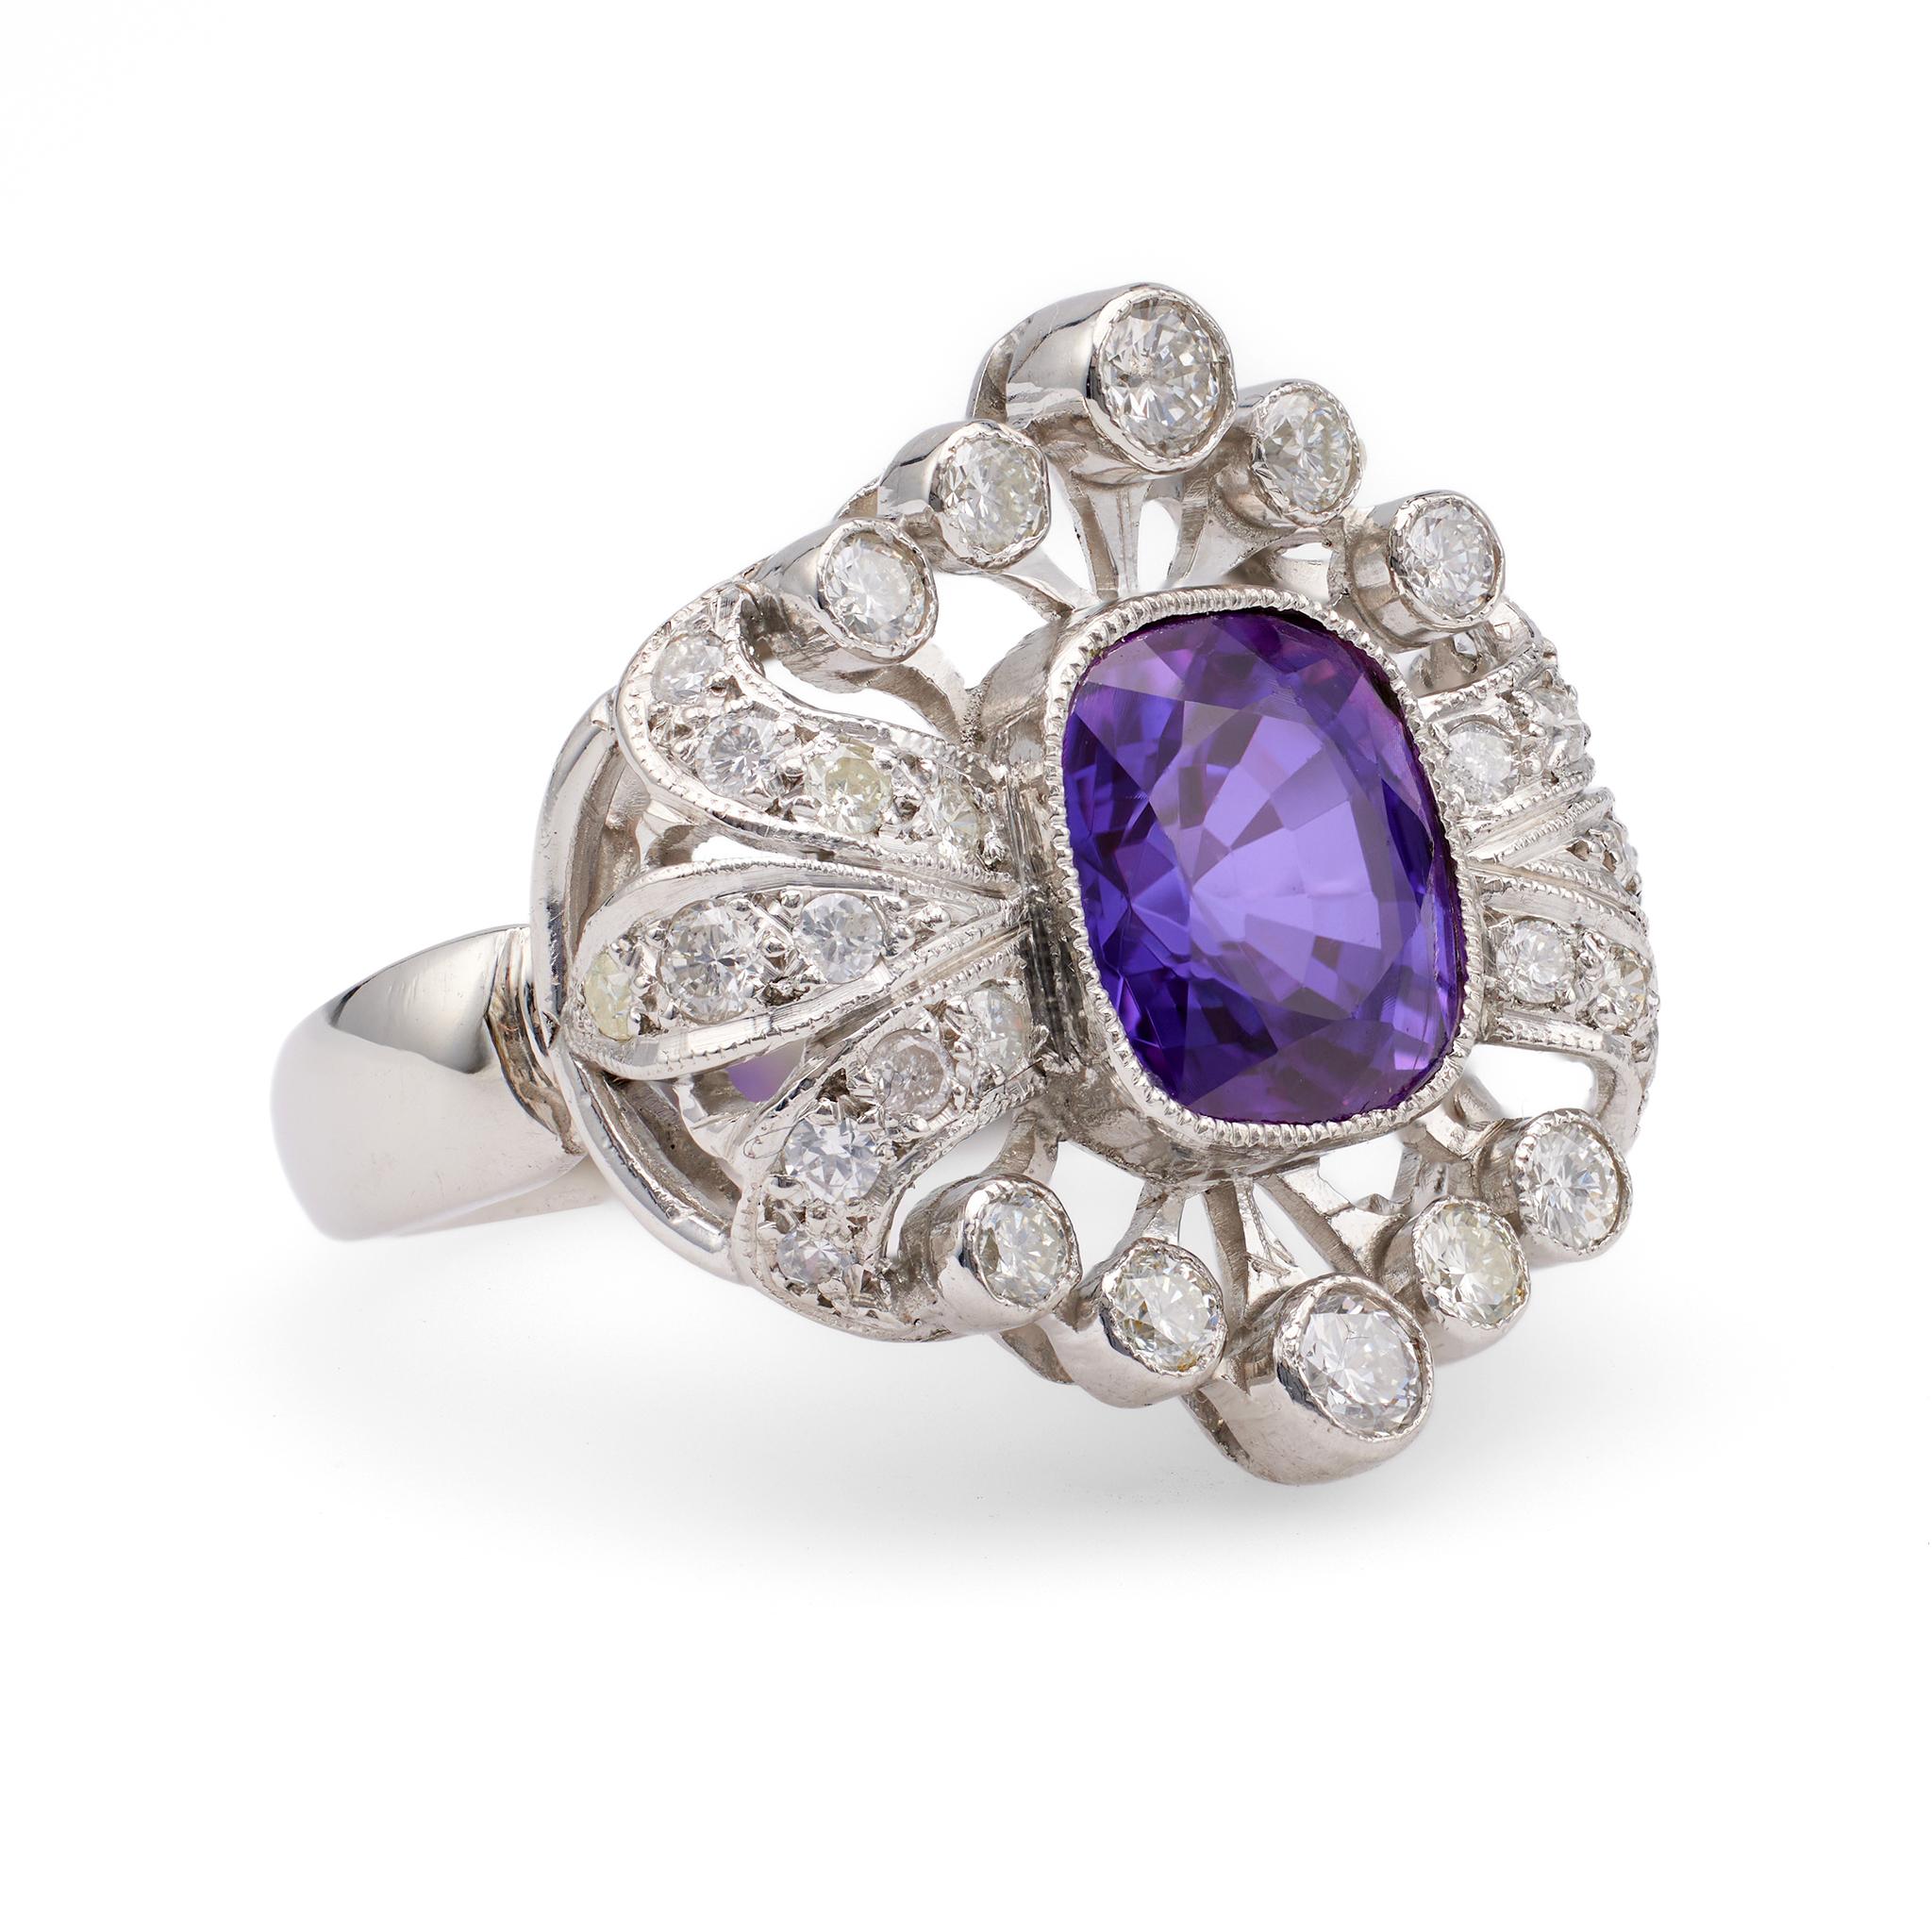 Edwardian Revival Amethyst Diamond Platinum Ring In Good Condition For Sale In Beverly Hills, CA